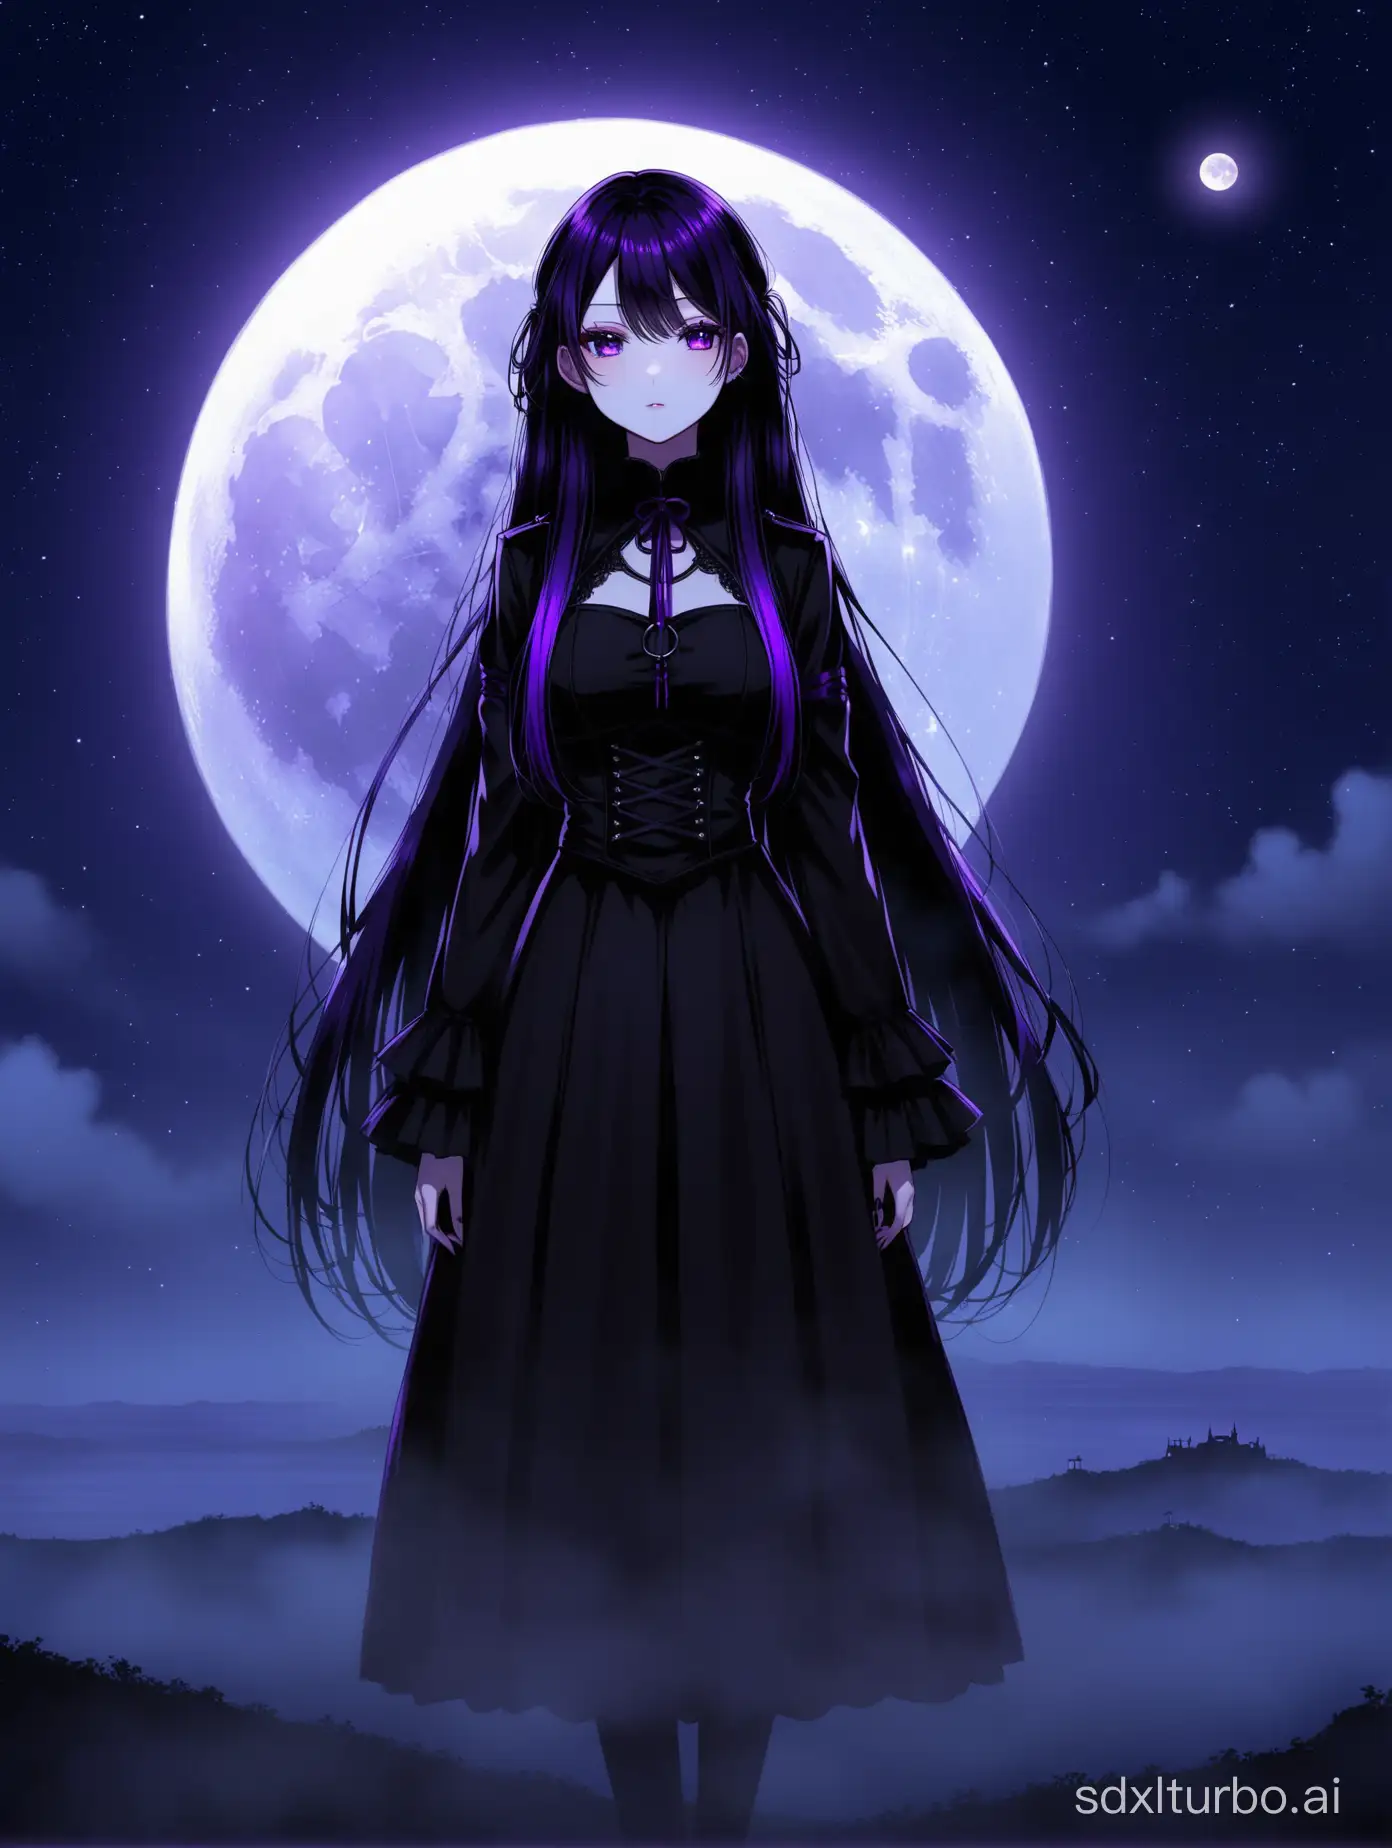 Lonely-Goth-Girl-Rei-Hino-with-Purple-Highlights-Under-a-Narrow-Moon